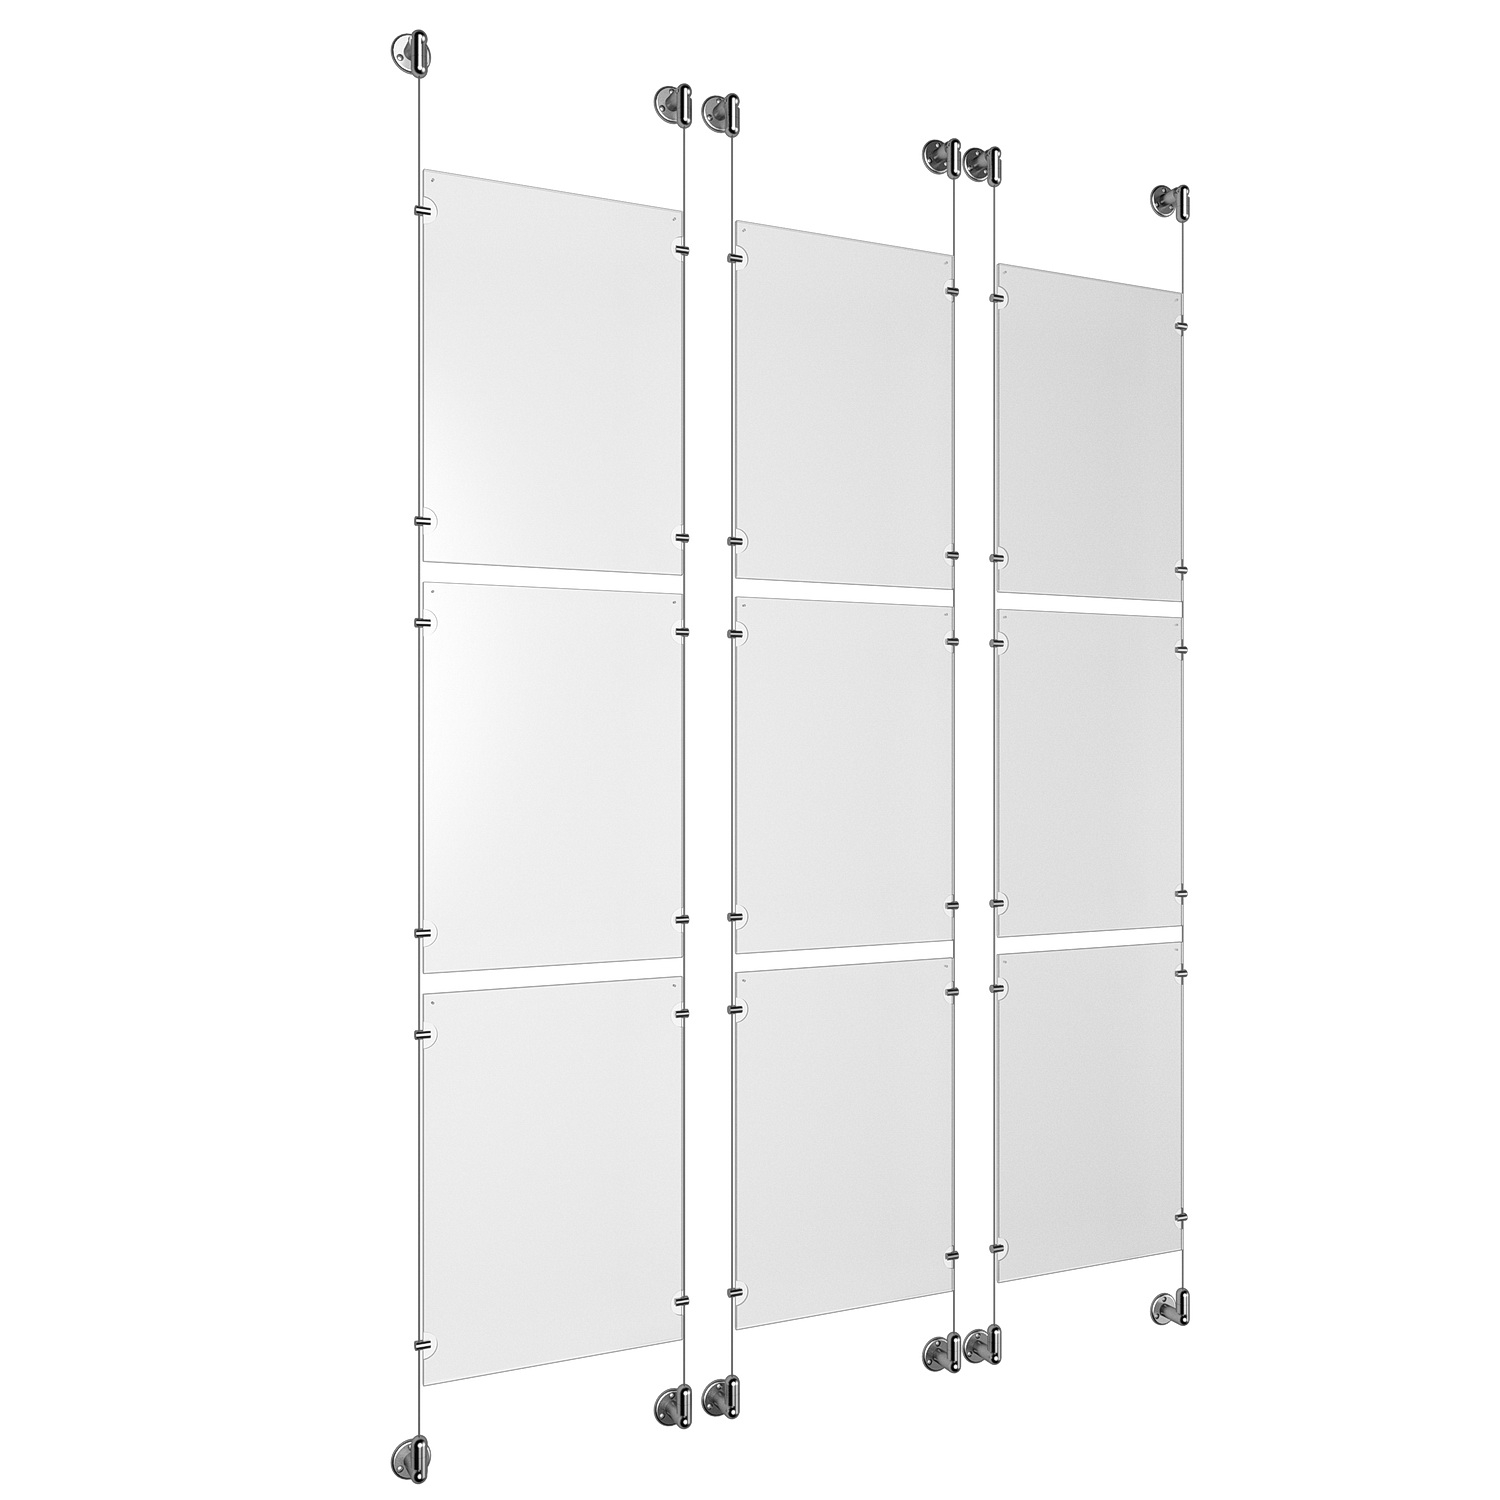 (9) 11'' Width x 17'' Height Clear Acrylic Frame & (6) Aluminum Clear Anodized Adjustable Angle Cable Systems with (36) Single-Sided Panel Grippers